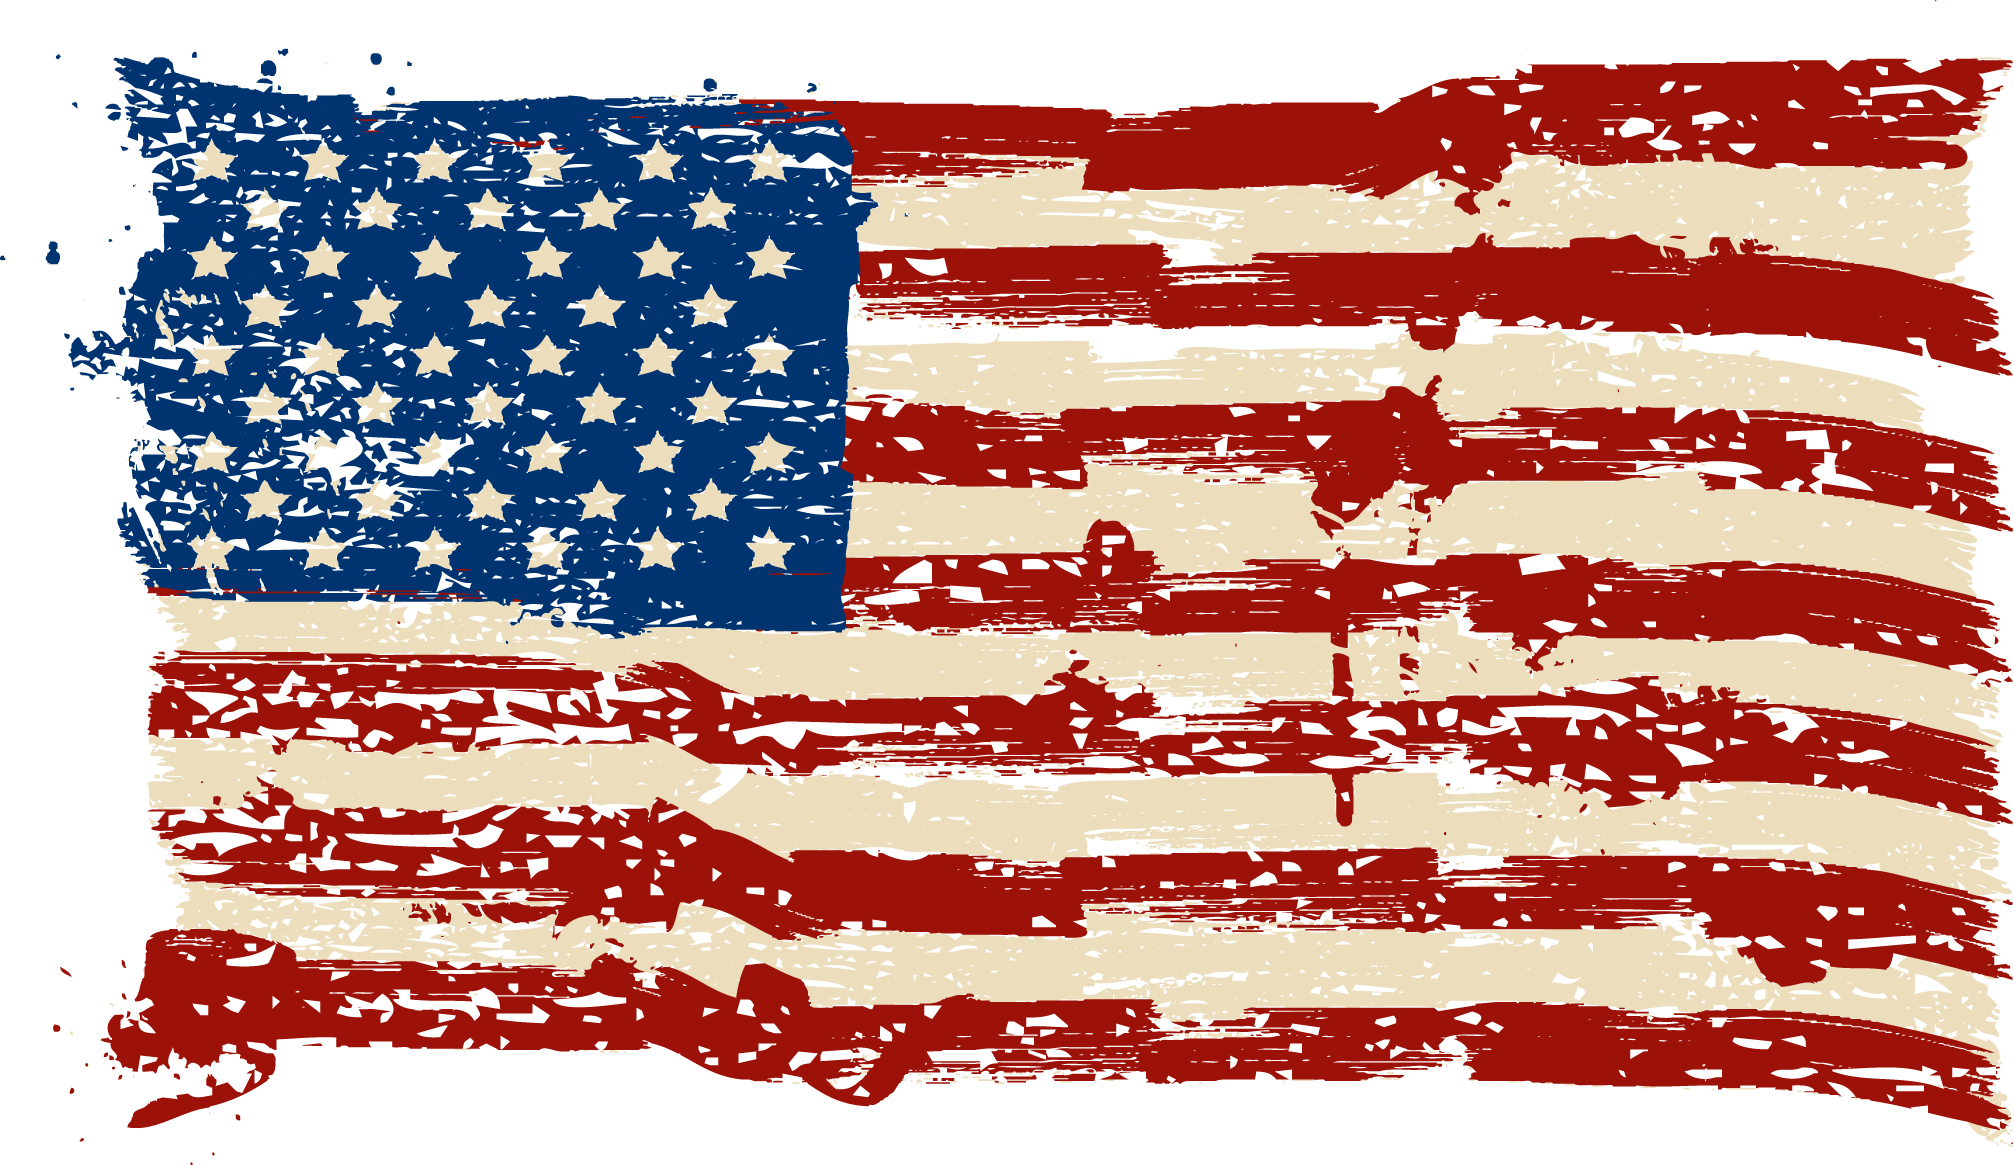 T-Shirt United Pledge Picture Of Allegiance States Clipart